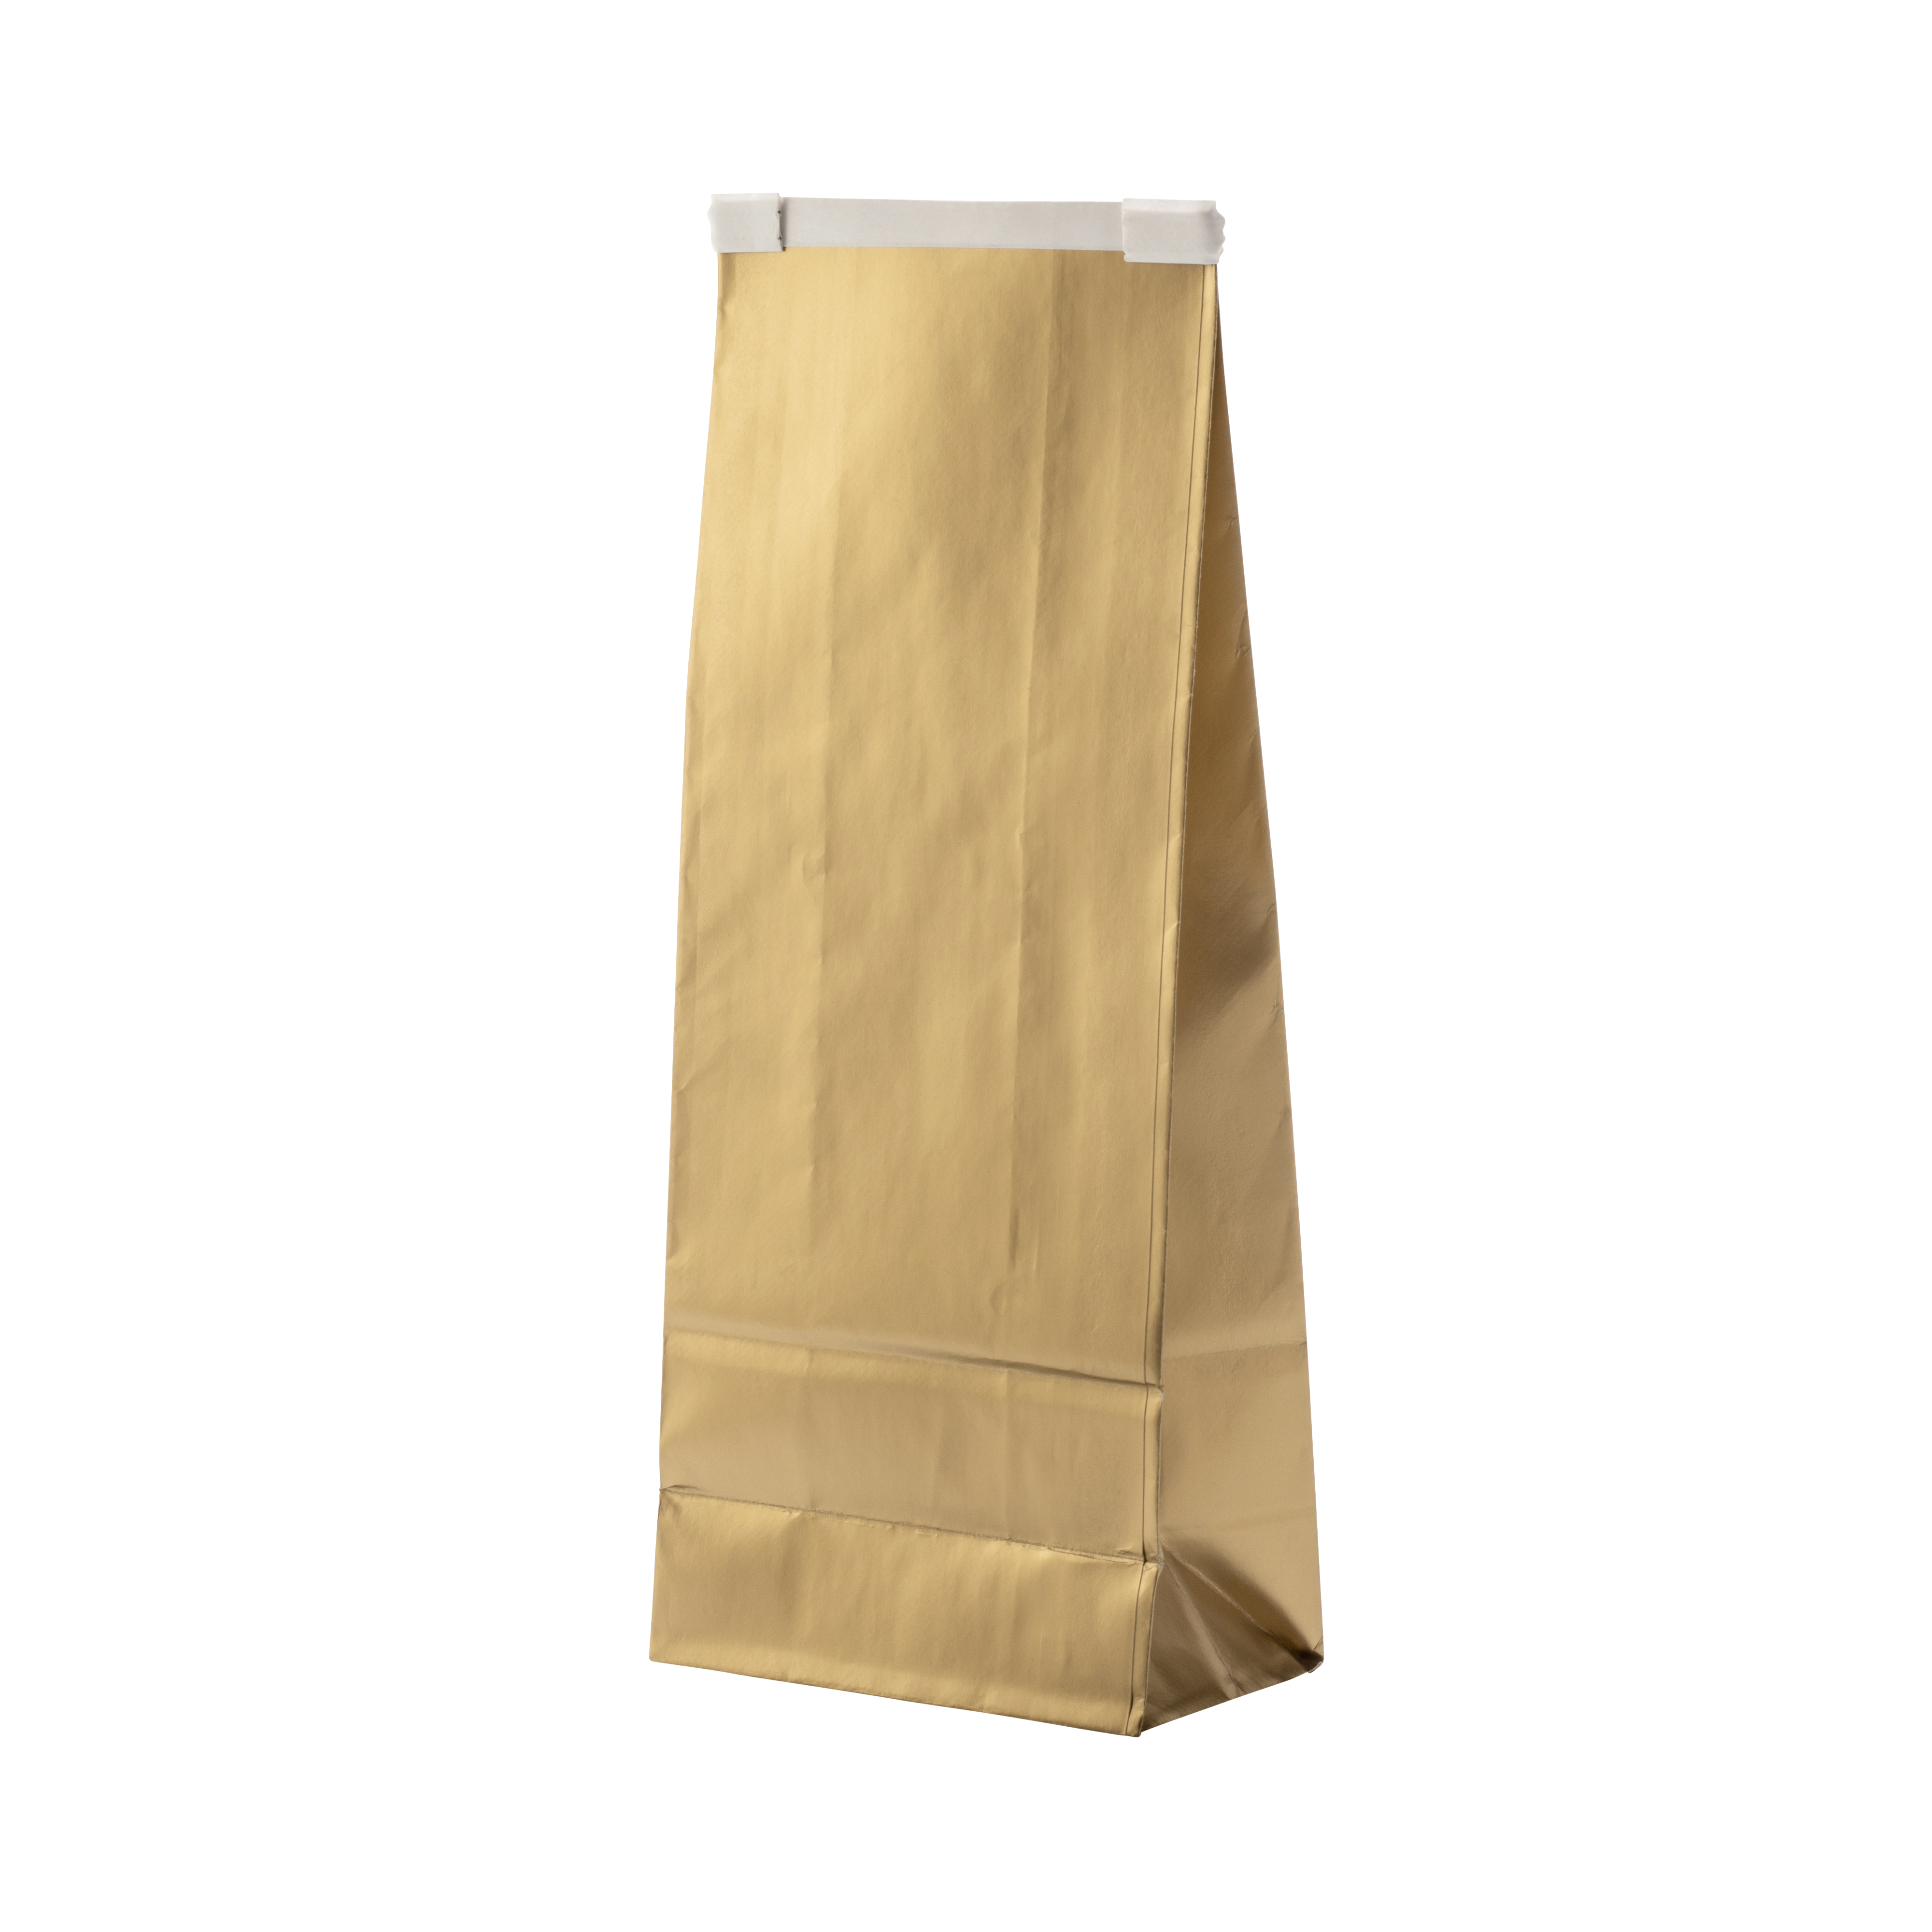 Brown paper bag with sealed top